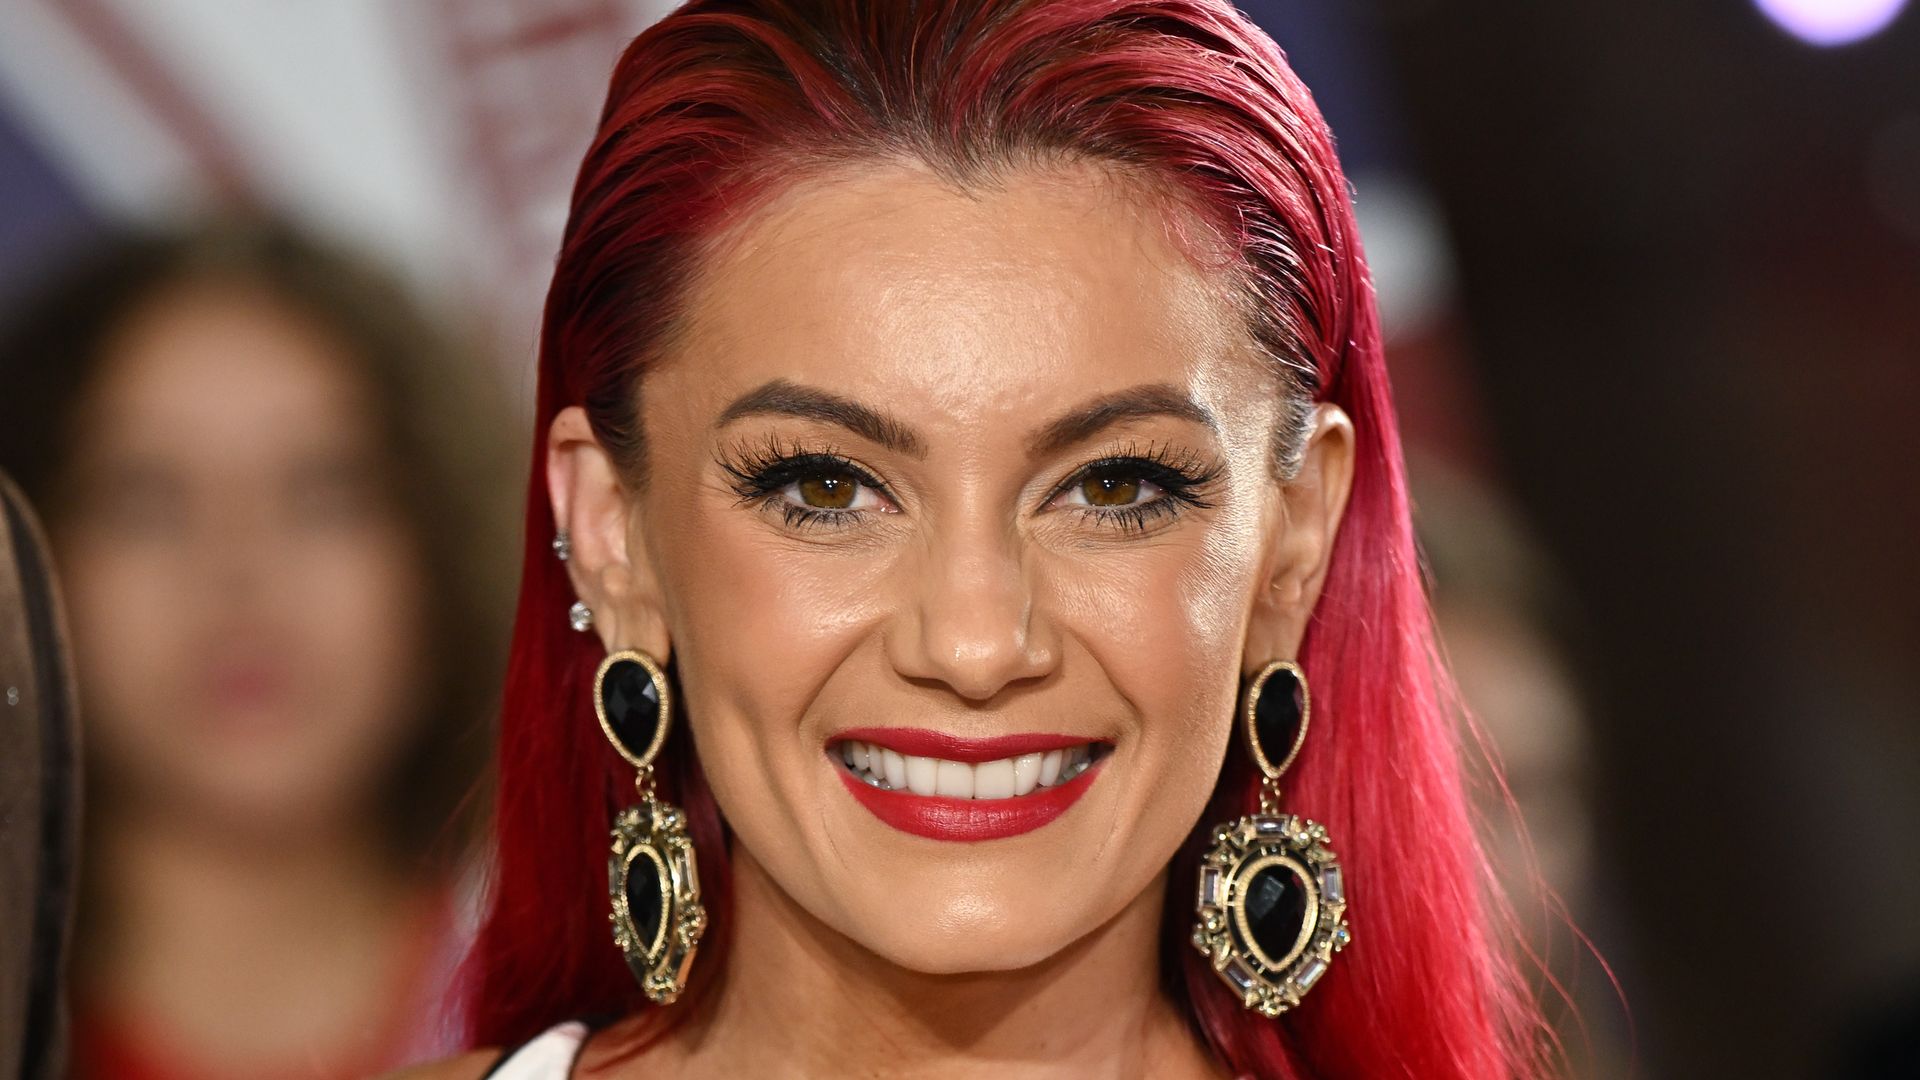 Strictly's Dianne Buswell shows off ultra-chiselled abs in sporty crop top